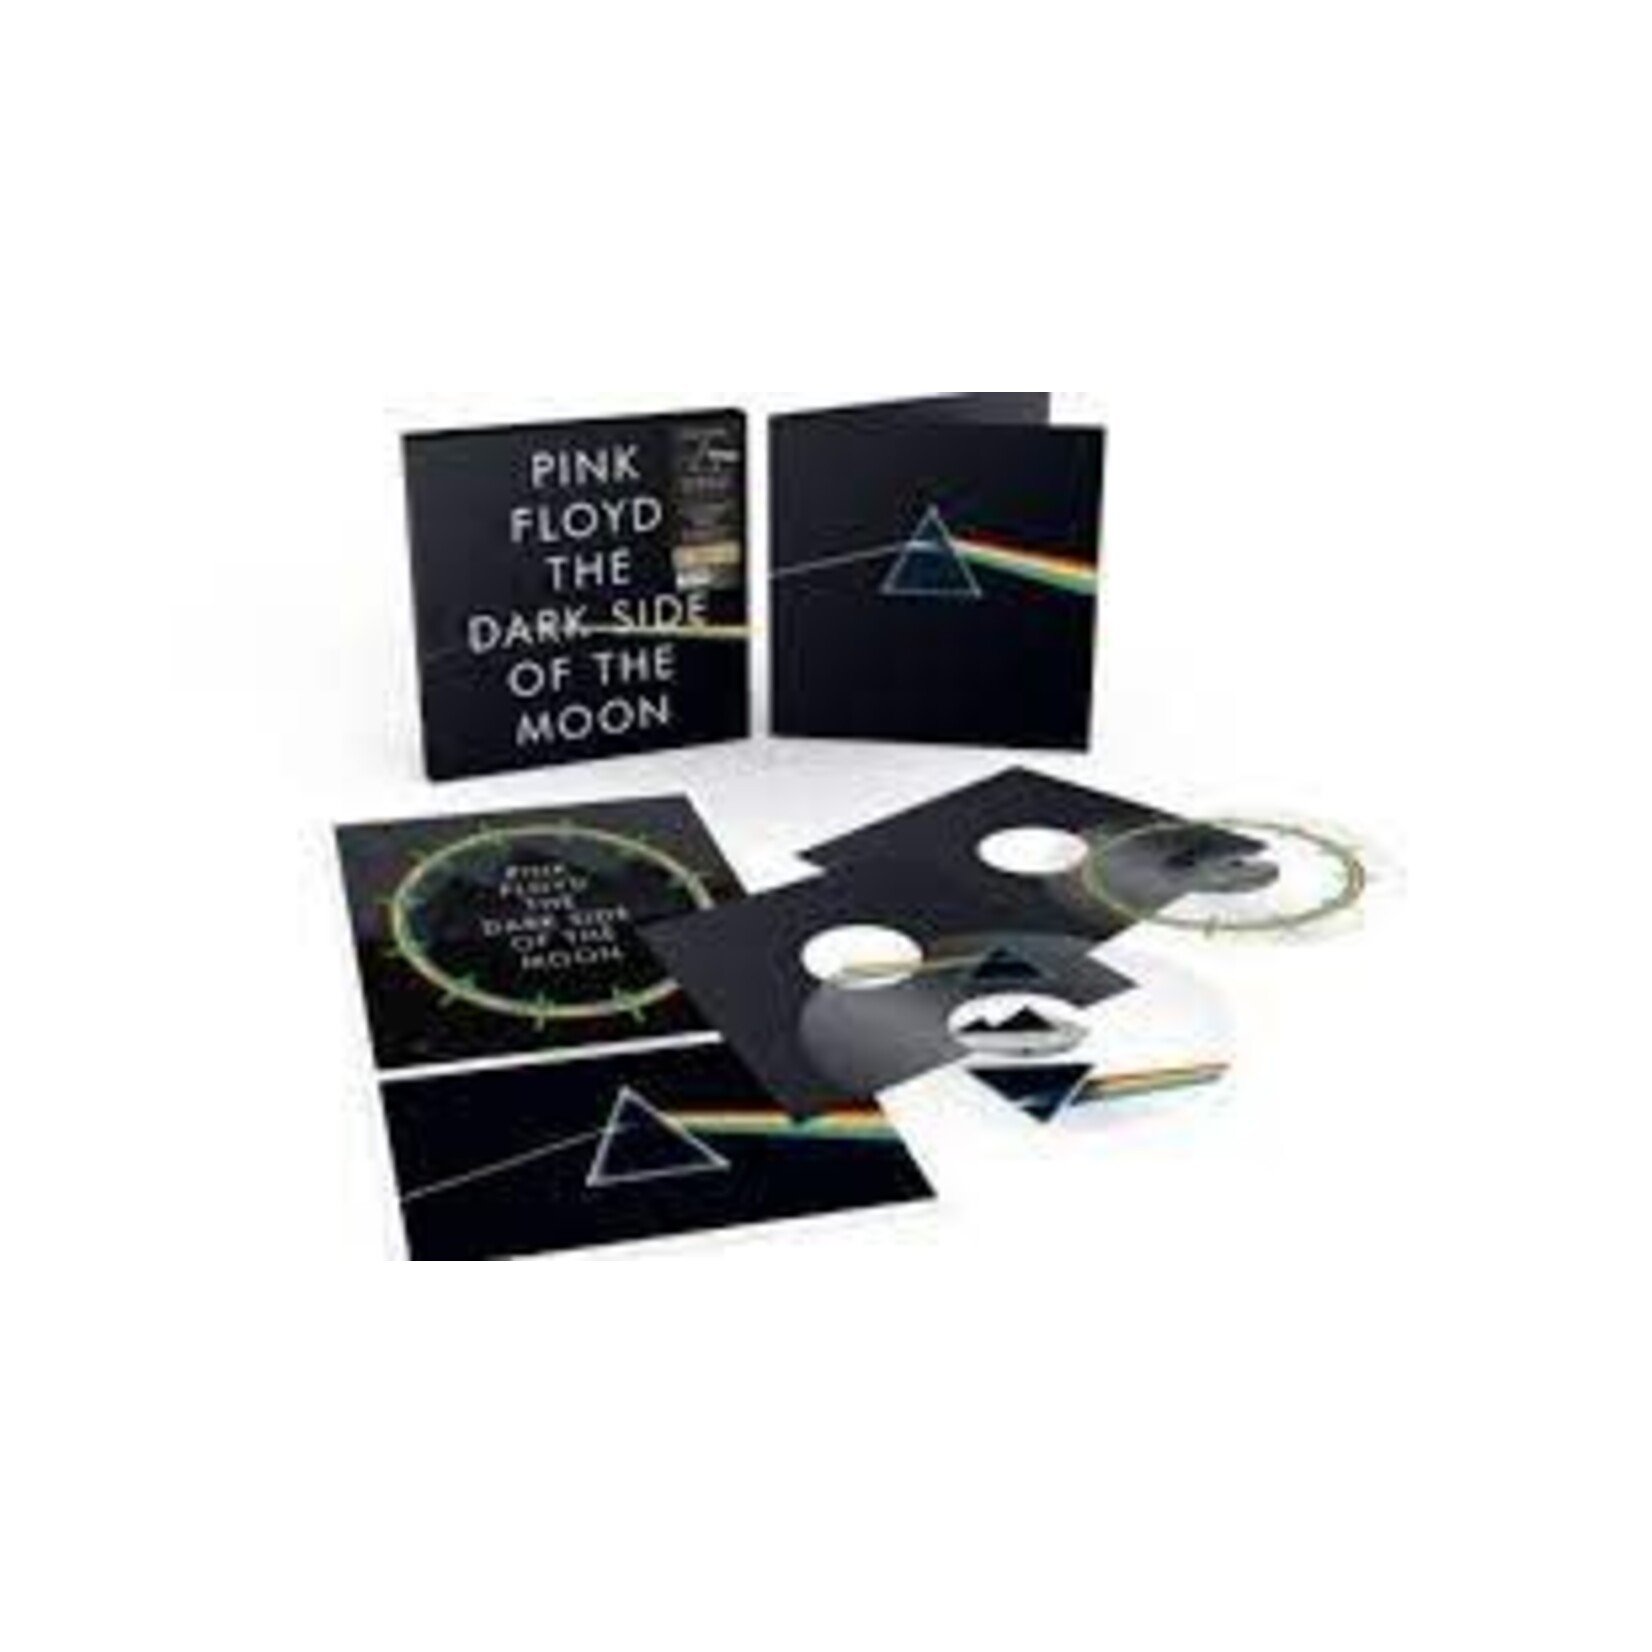 PINK FLOYD - THE DARK SIDE OF THE MOON 50TH ANNIVERSARY